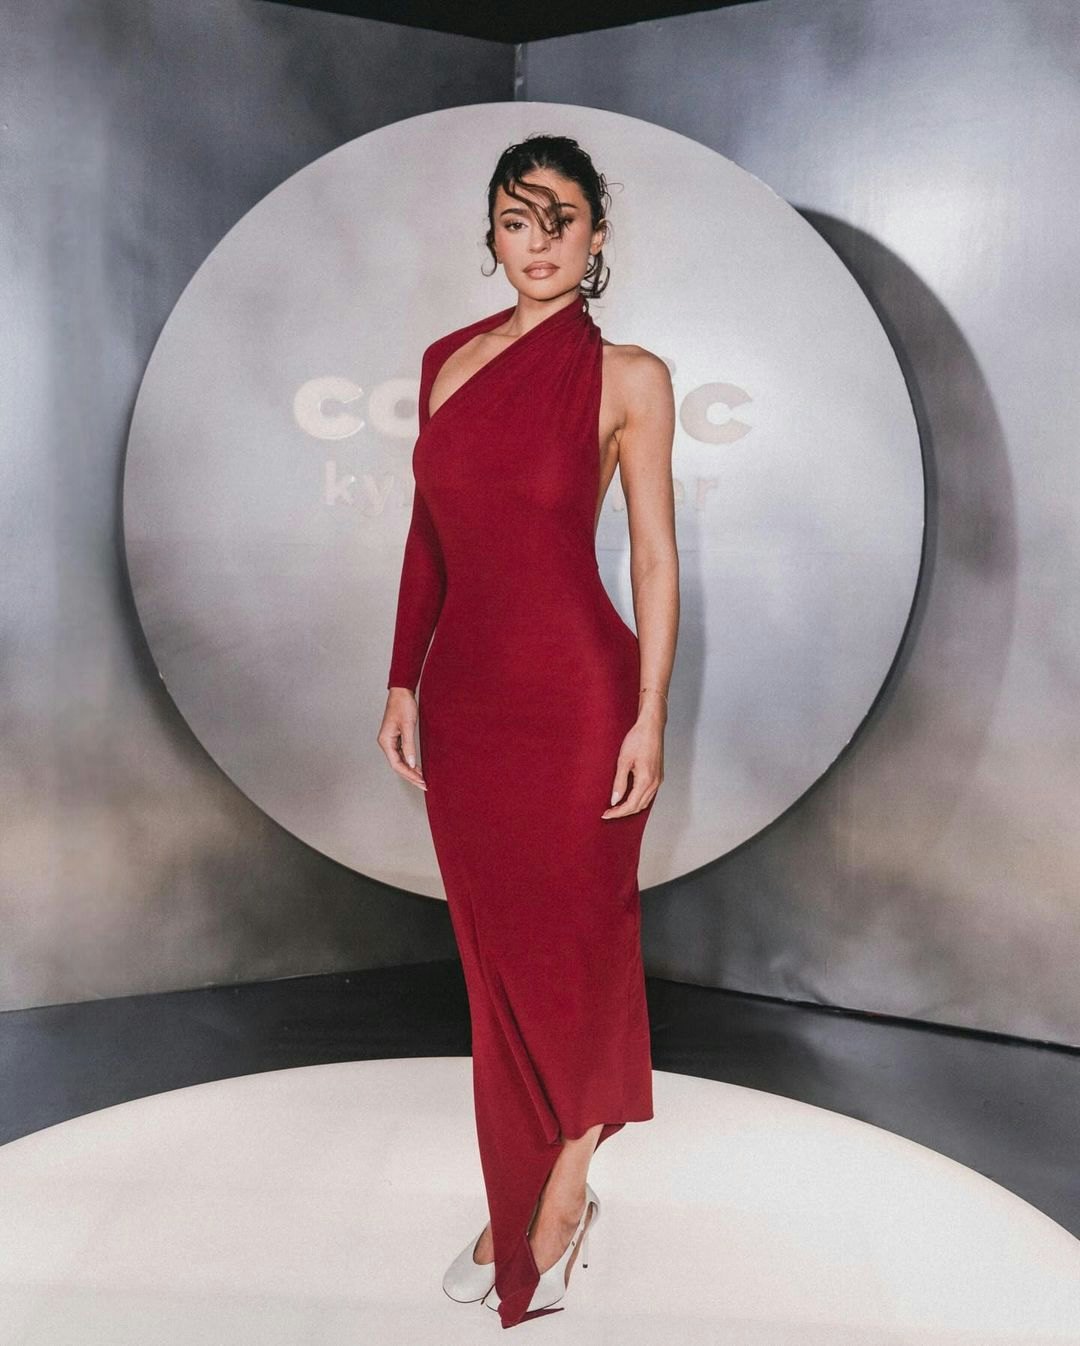 Kylie Jenner Accents a Backless Gown With Some Major Side Boob